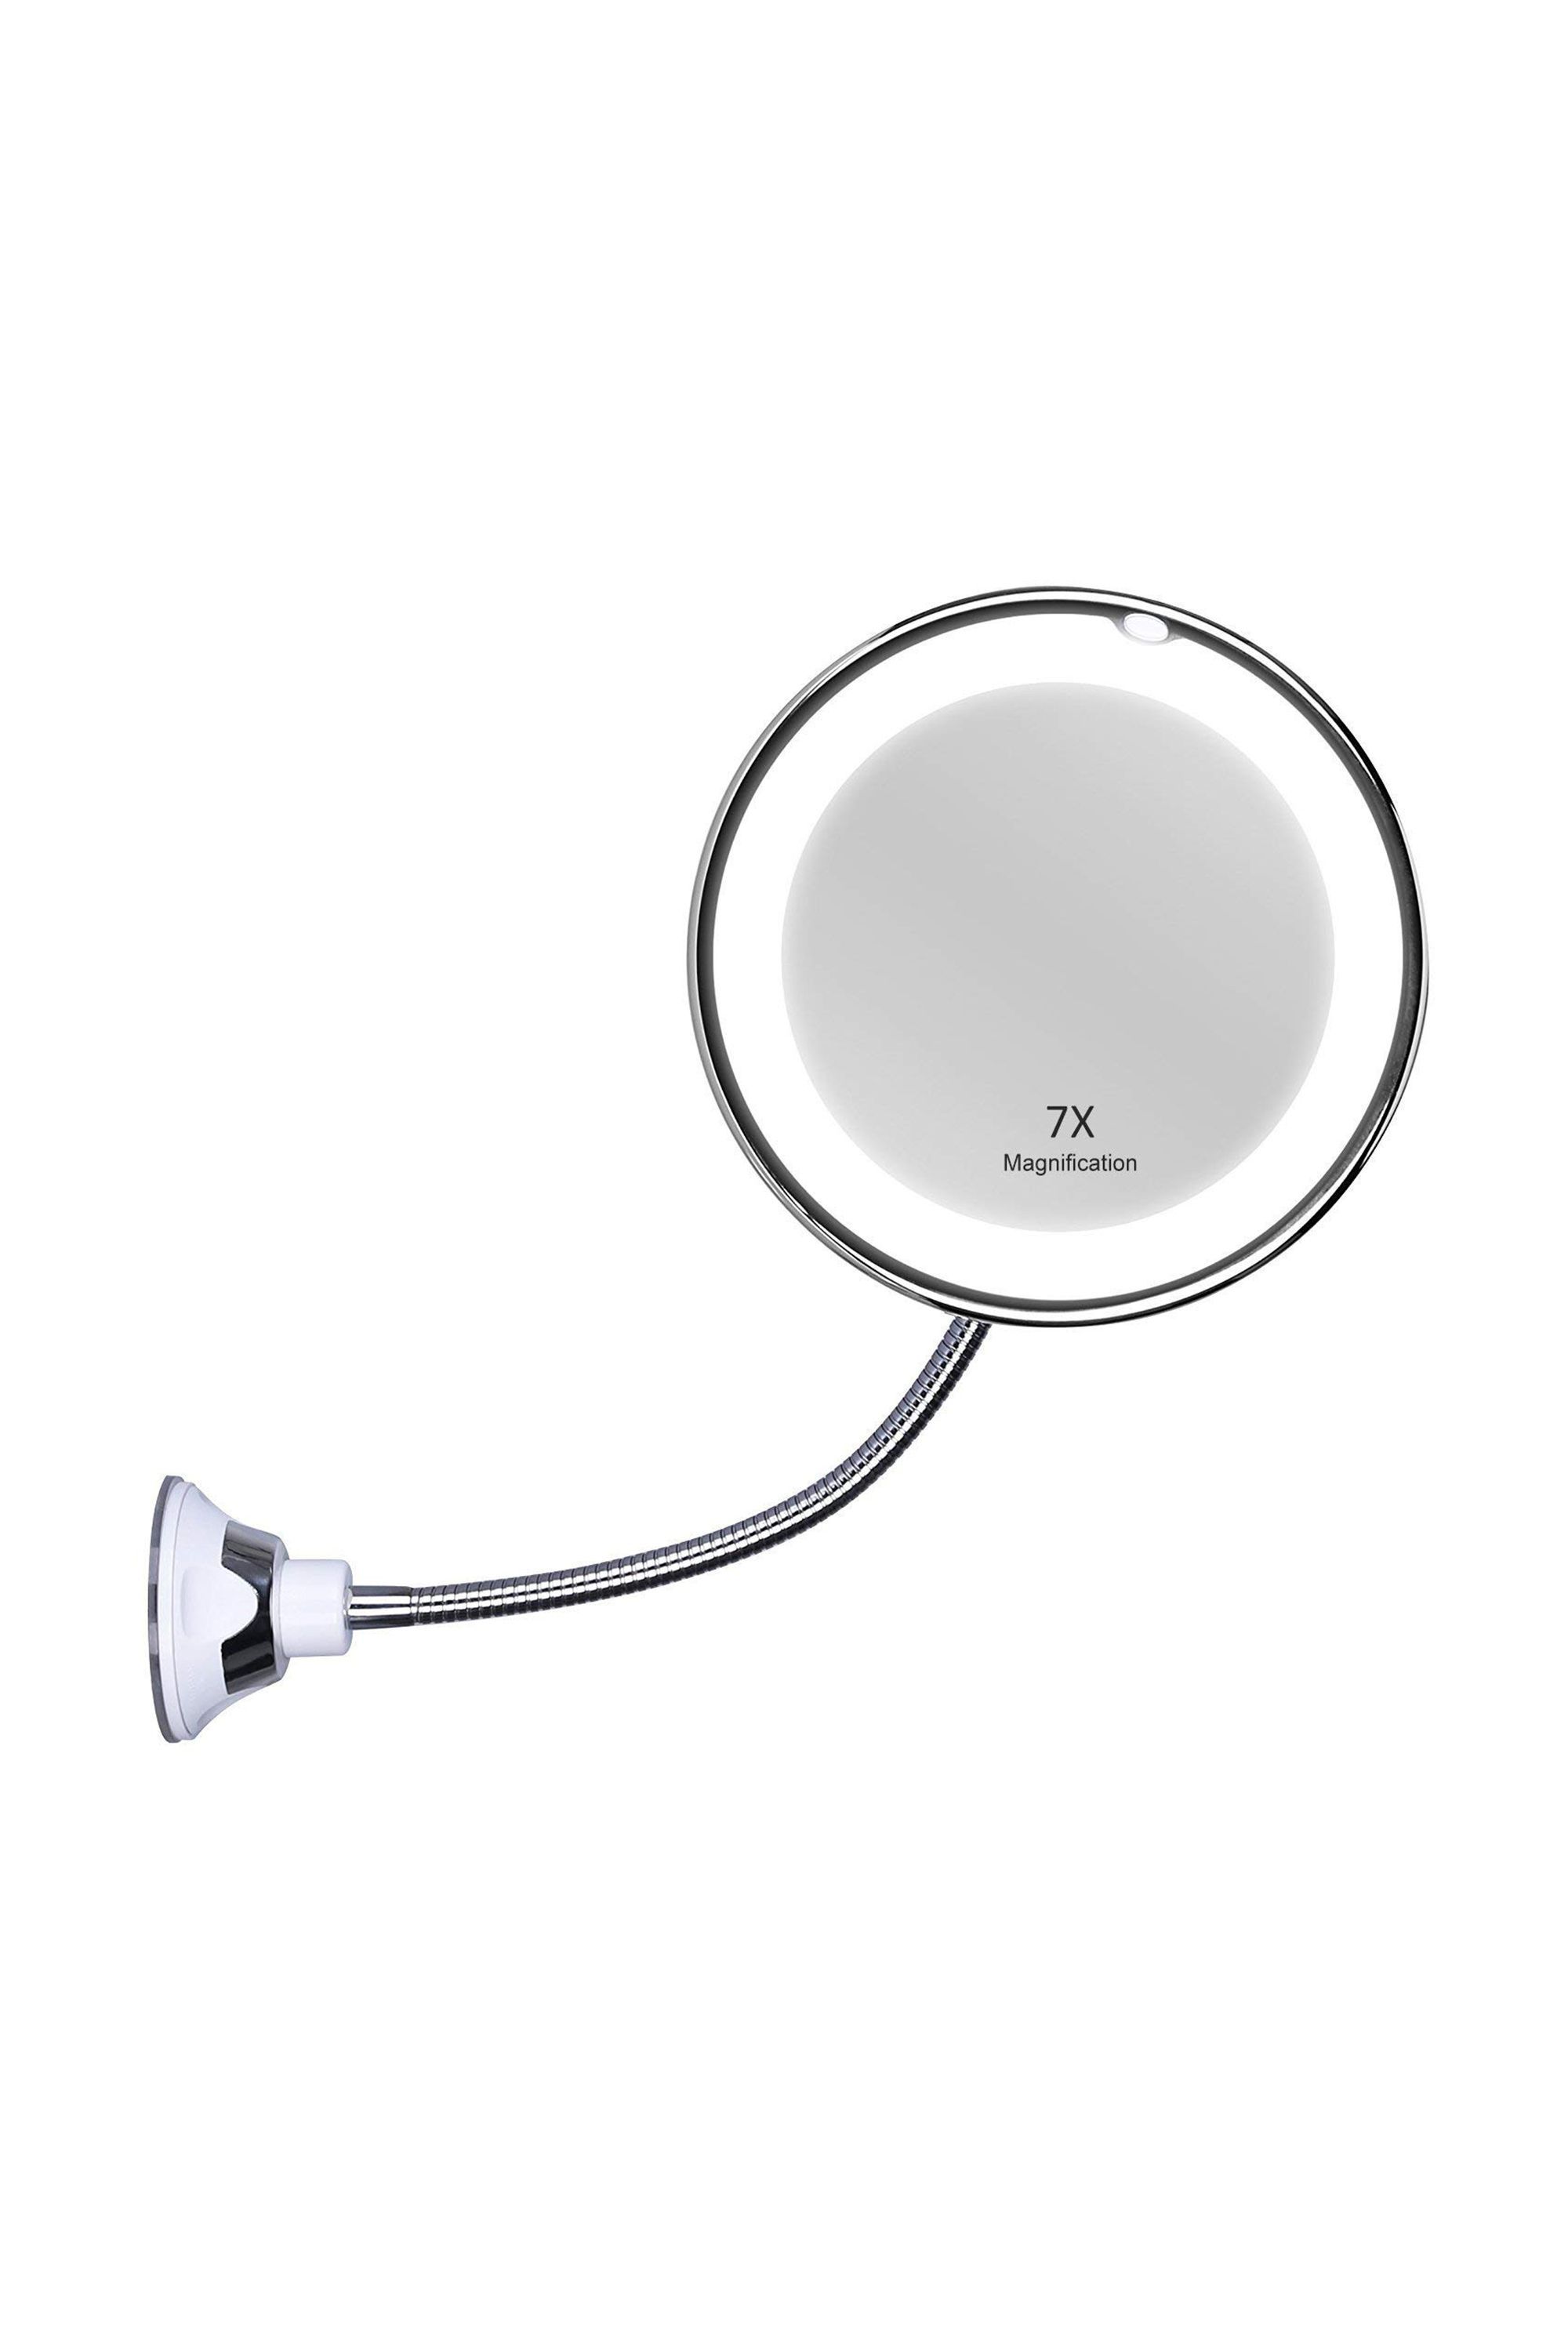 12 Makeup Mirrors With Lights To, Best Lighted Makeup Mirror Plug In